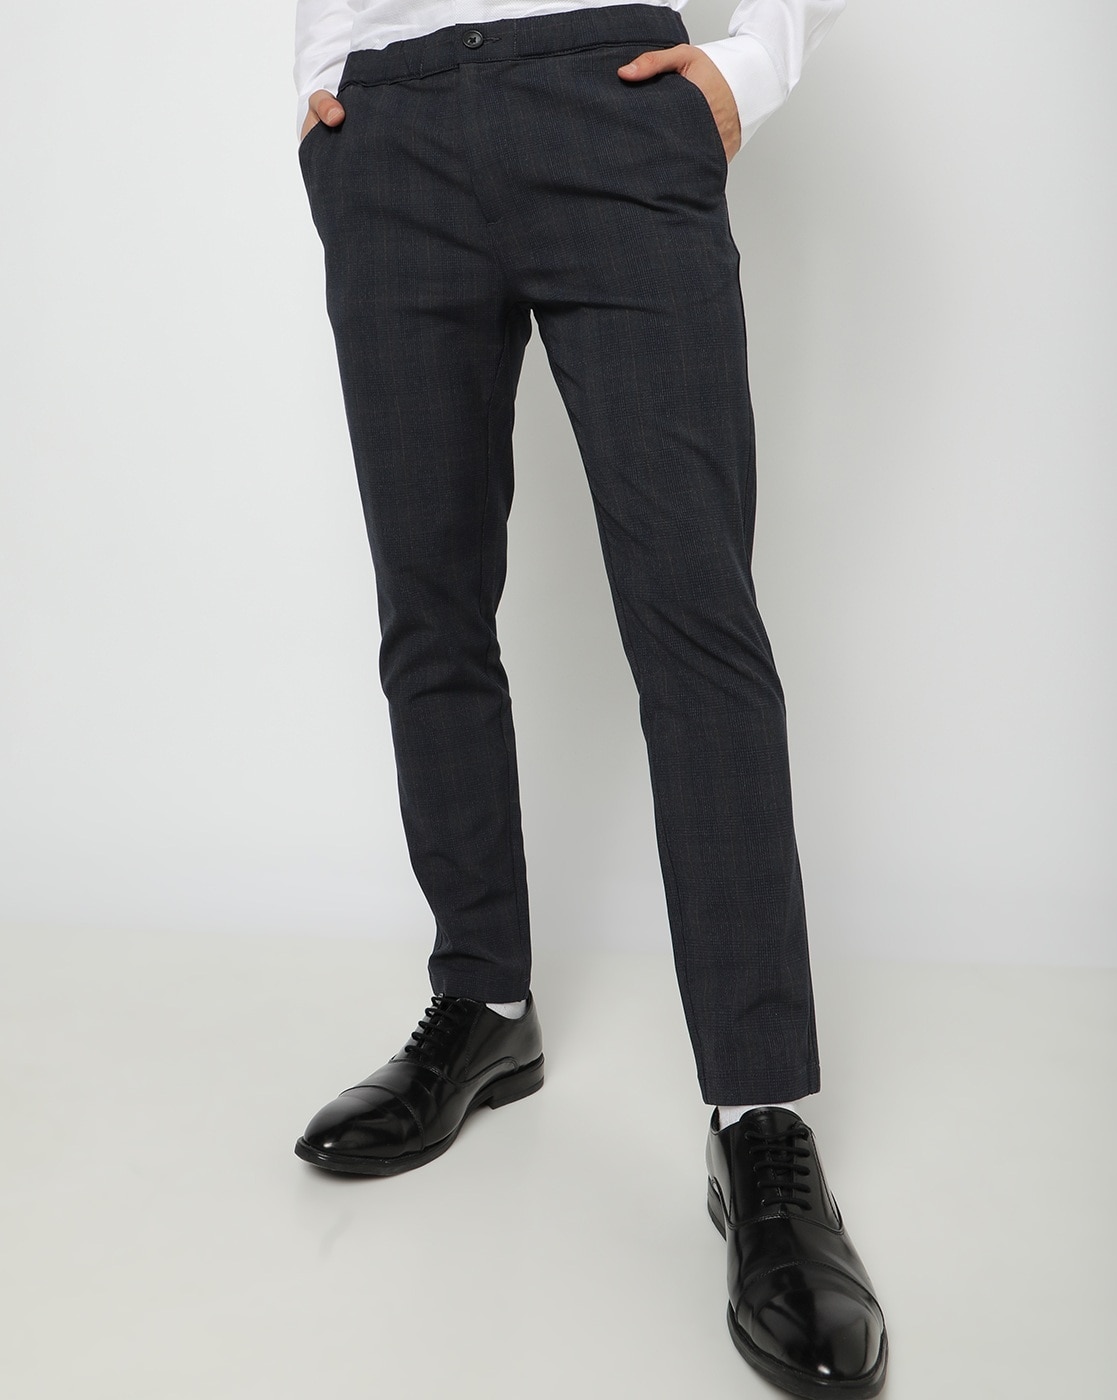 Buy Silver Trousers & Pants for Men by Mozzo Online | Ajio.com